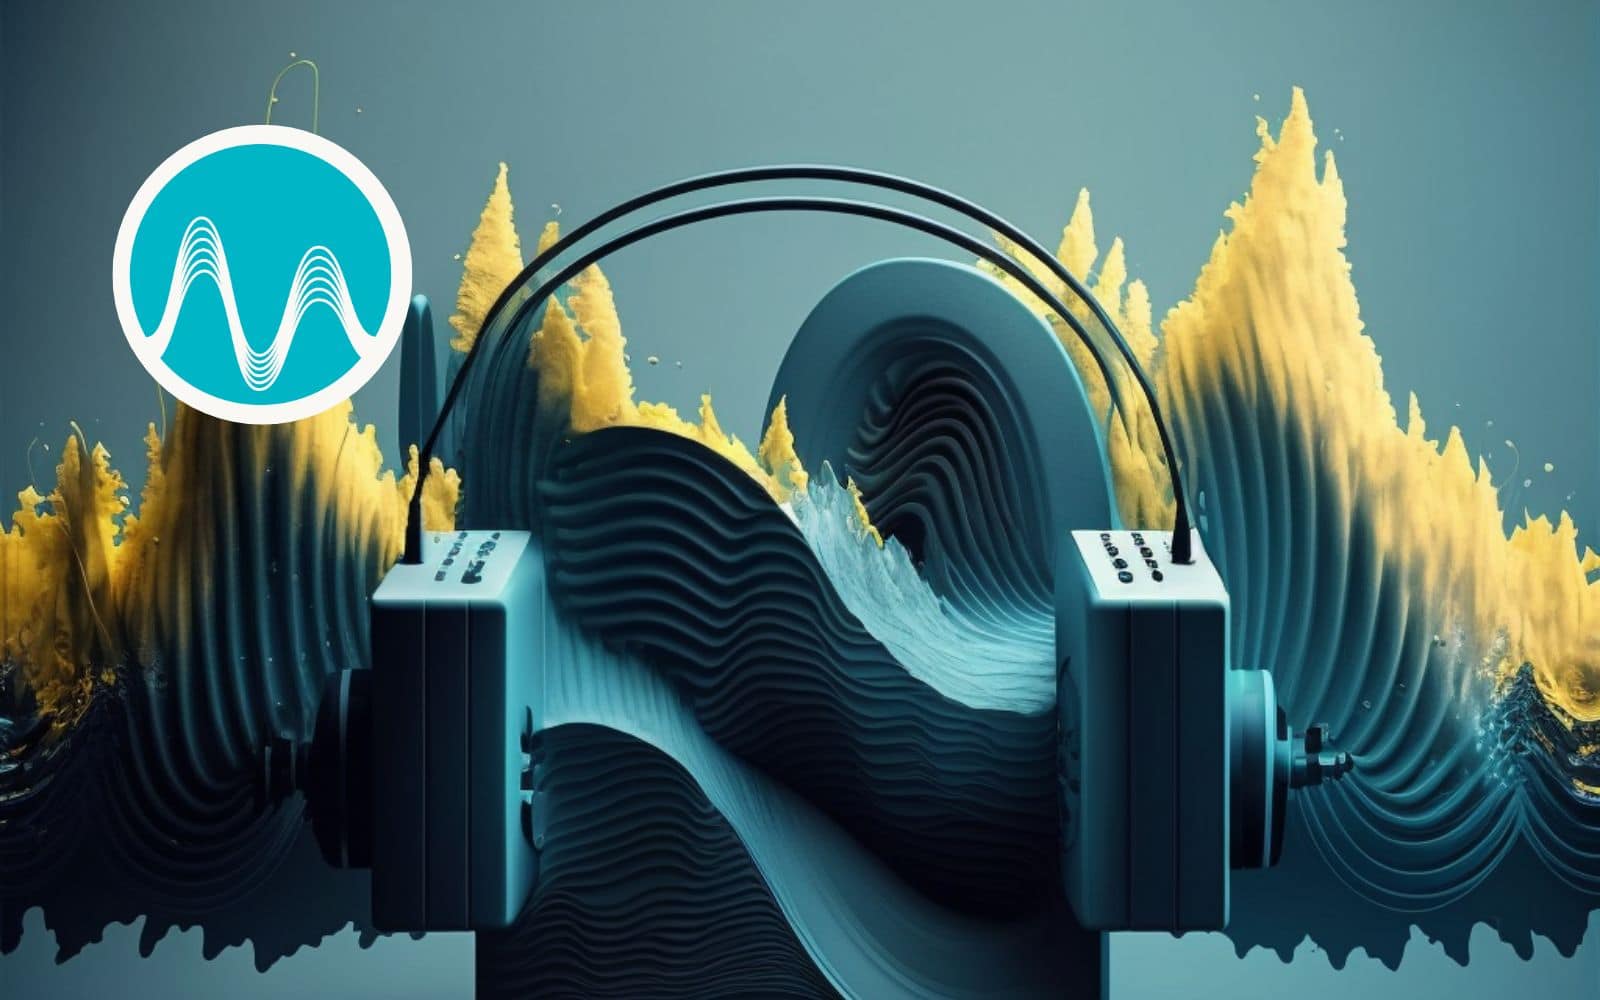 Podcast Editing Tutorial With Adobe Audition - How To Master Audio